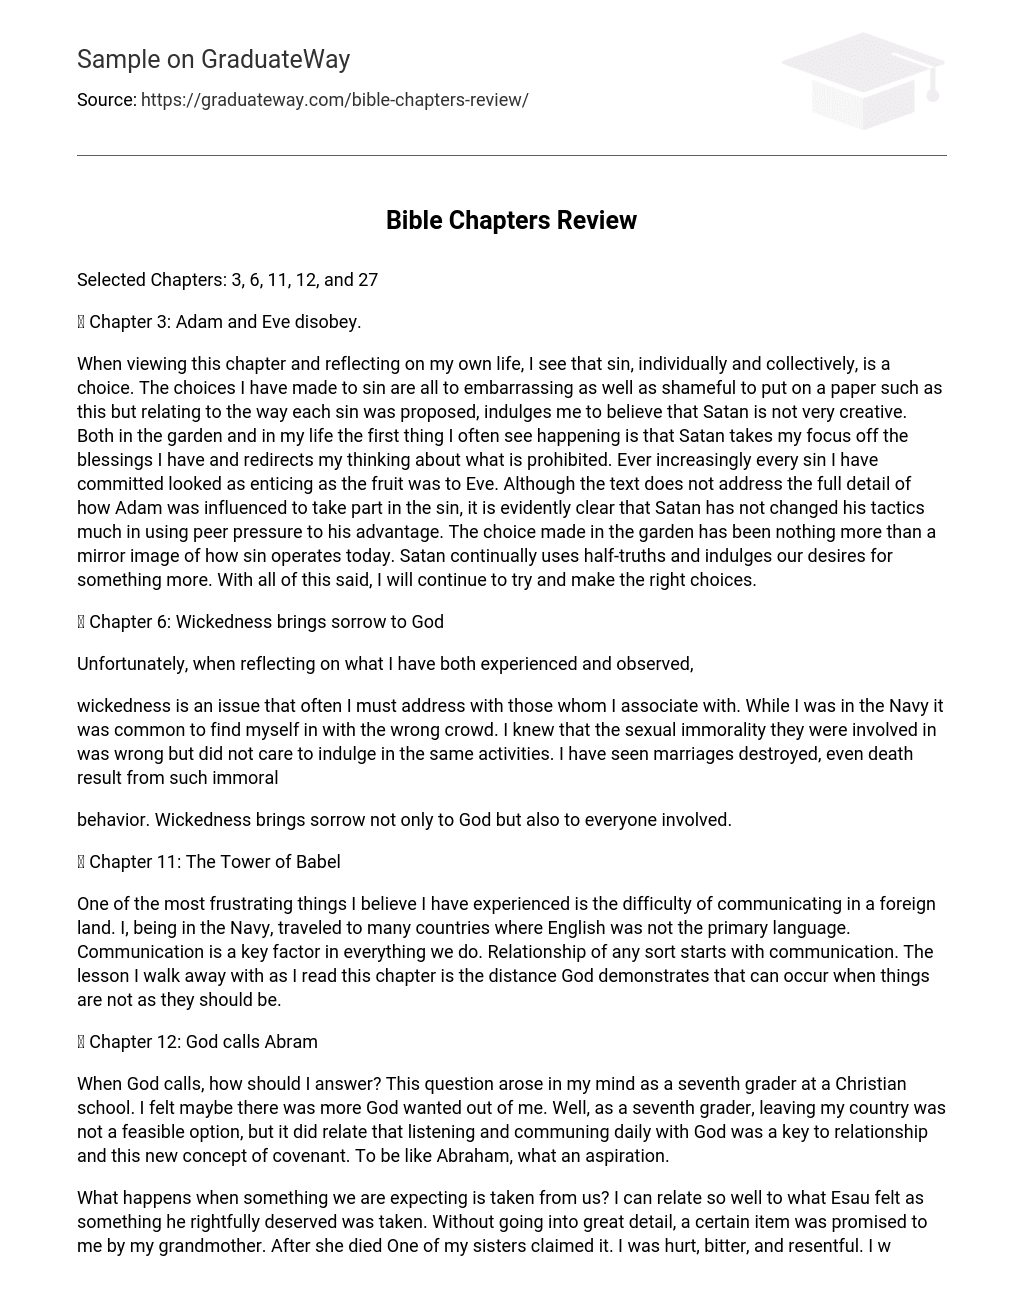 Bible Chapters Review